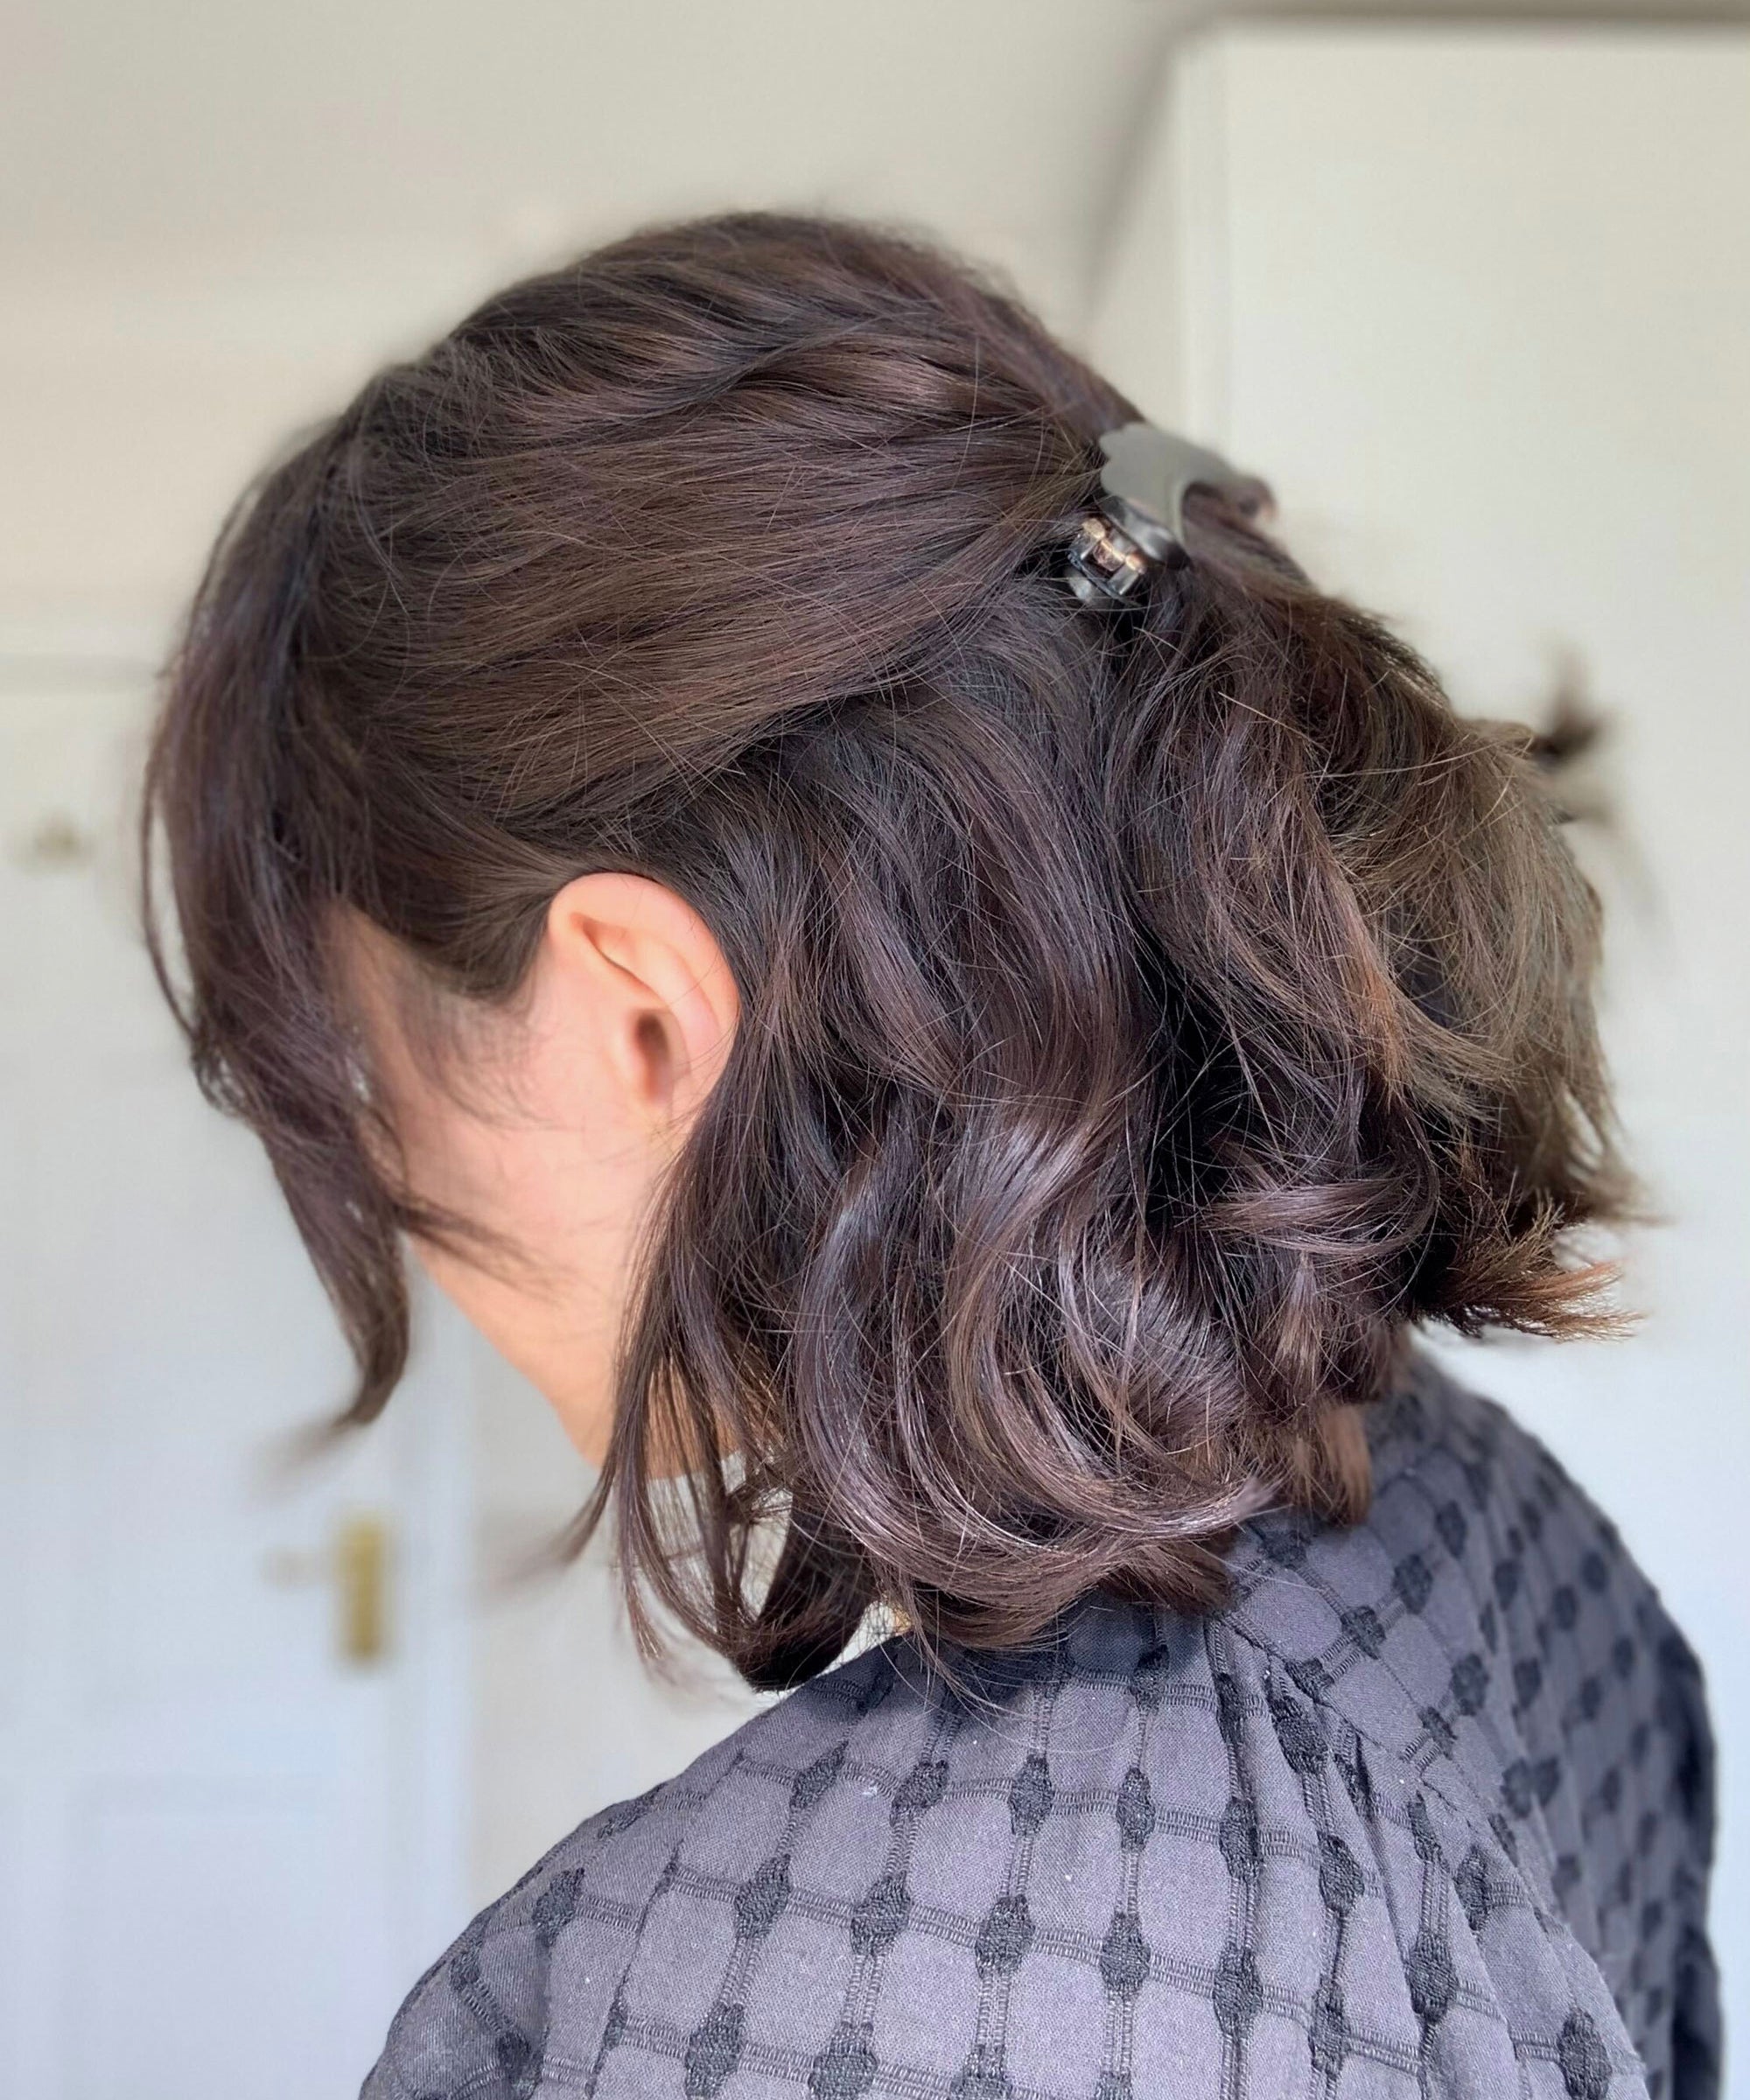 Knotted Updo · Extract from DIY Updos, Knots, and Twists by Melissa Cook ·  How To Style An Updo Hairstyle